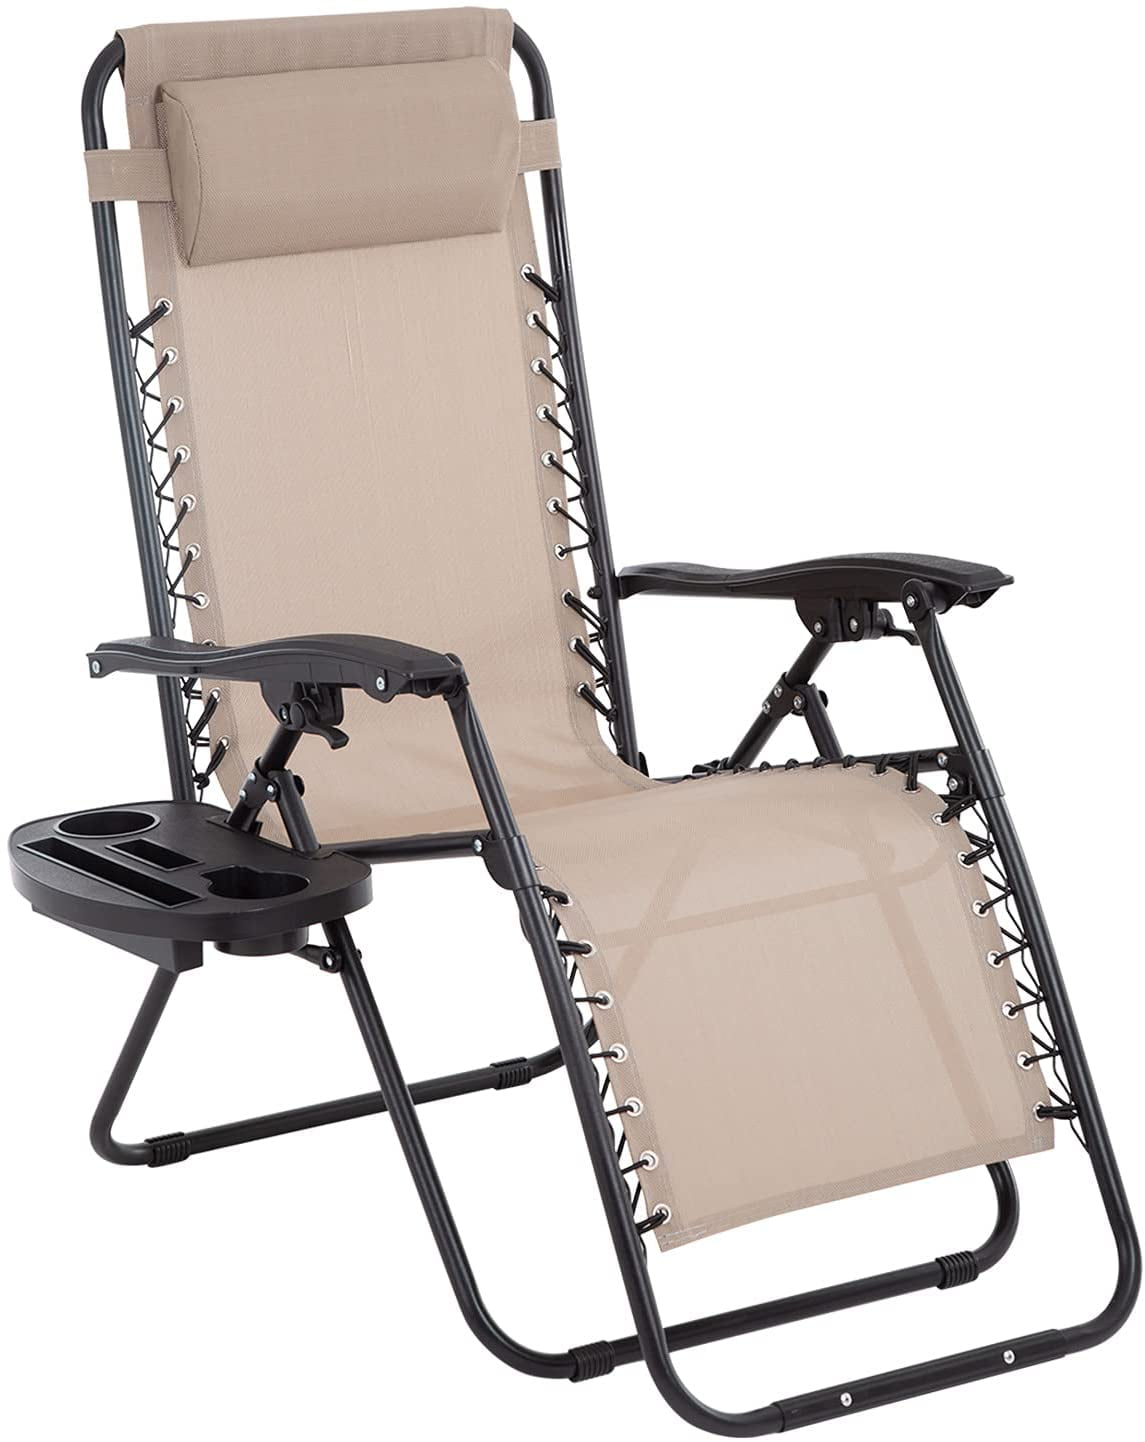 Zero Gravity Chair,Zero Gravity Lounge Chair,1 Pack Folding Lawn chair  Adjustable reclining patio chairs with Pillow and Side Table For Pool Yard  with Cup Holder,Black - Walmart.com